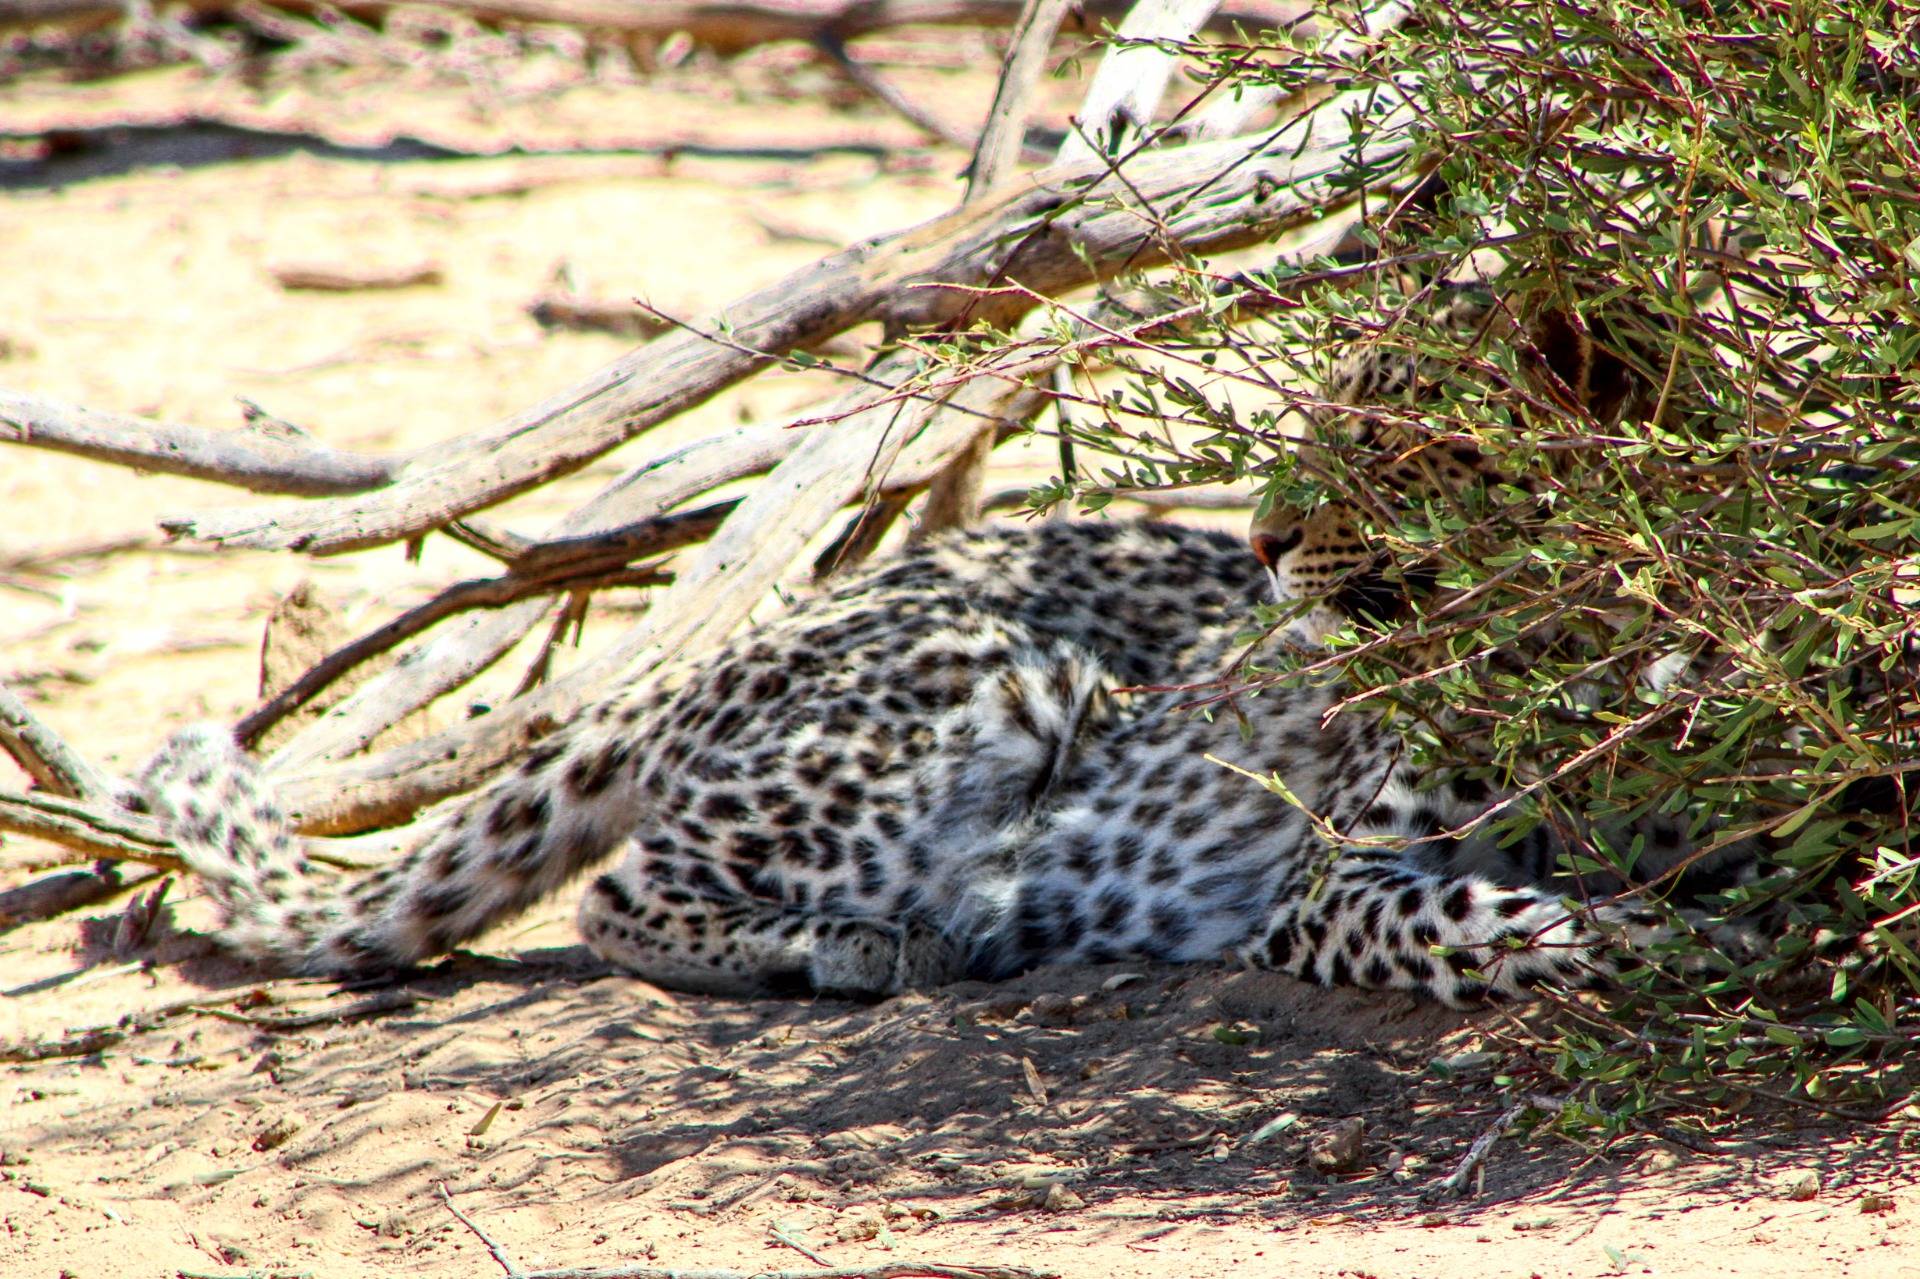 Leopard spending some time in the shade.